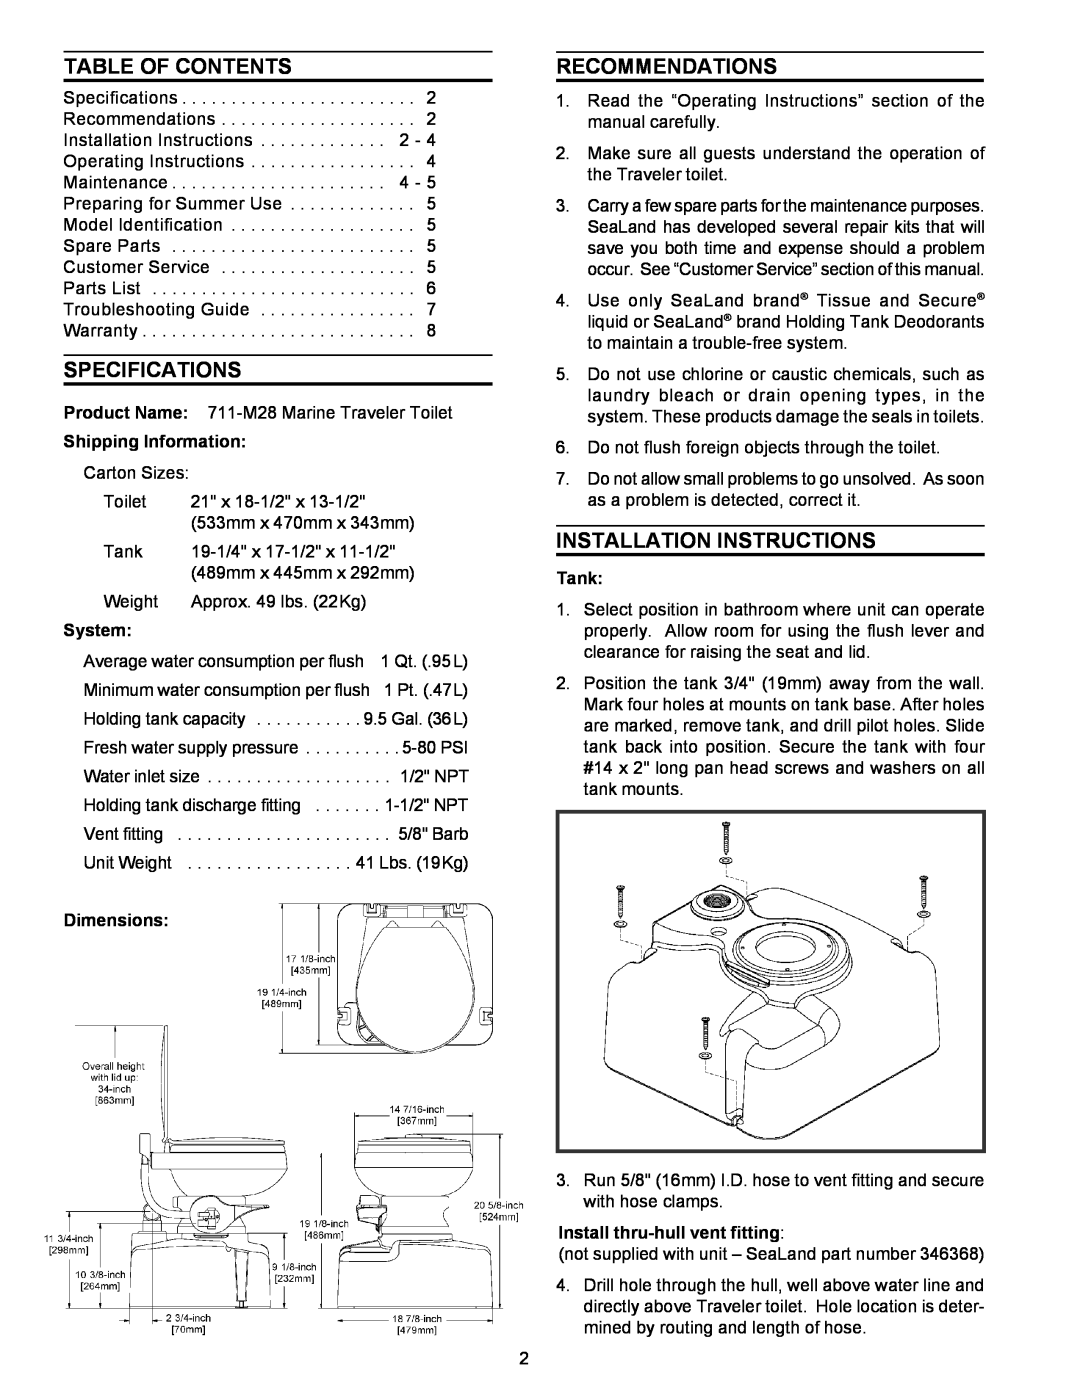 SeaLand 711-M28 Table Of Contents, Specifications, Recommendations, Installation Instructions, Shipping Information, Tank 